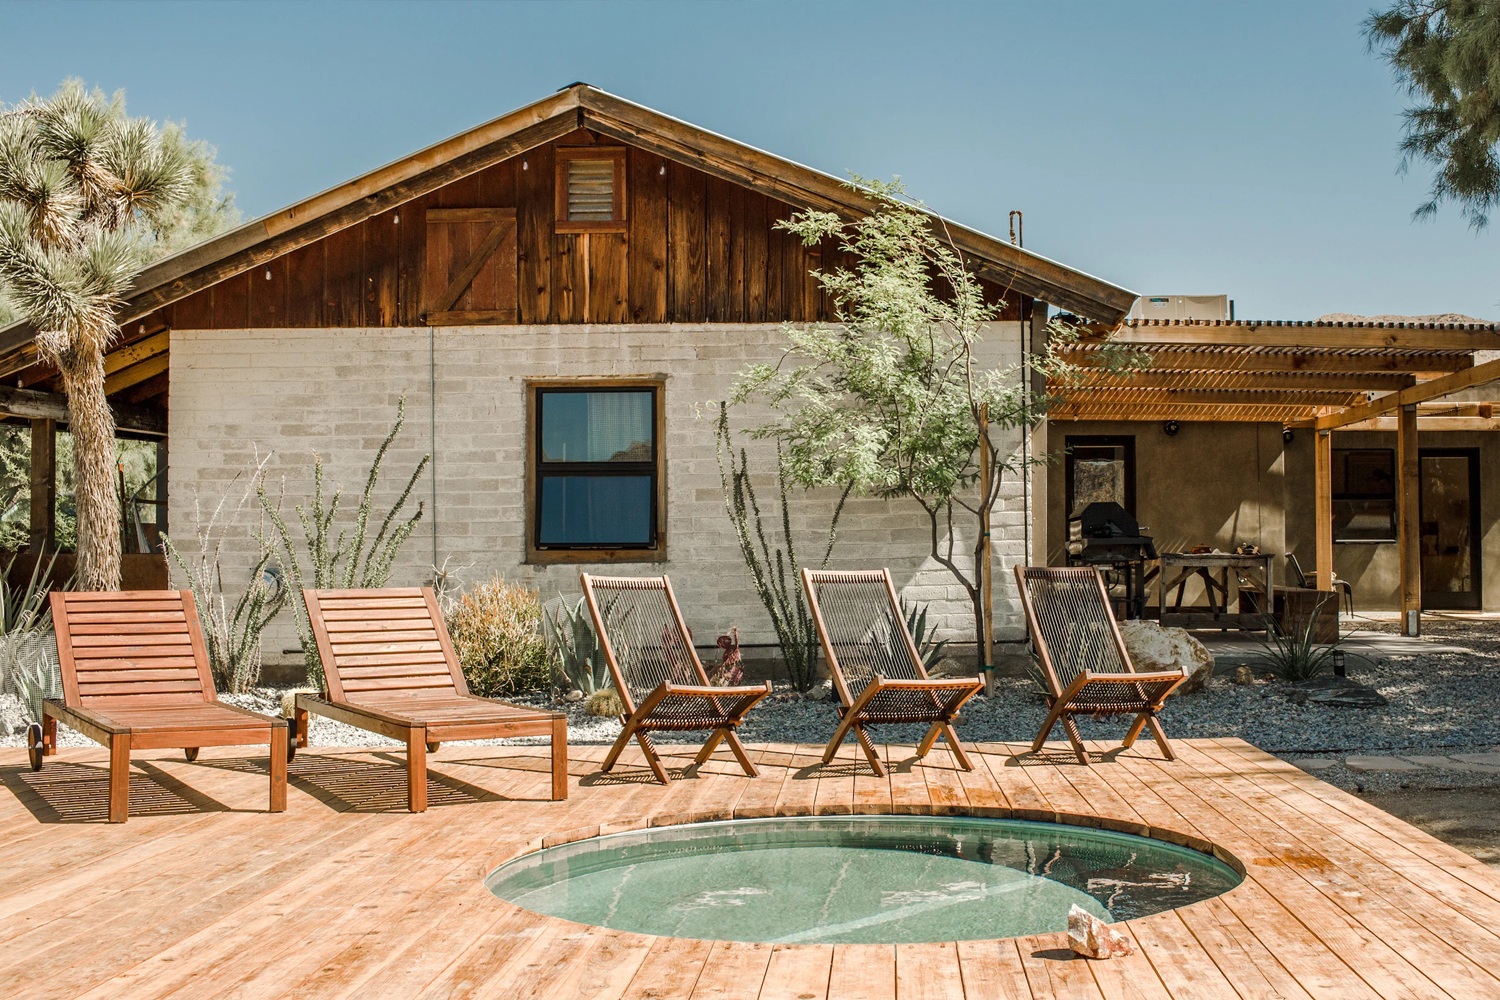 Patio deck with teak seating and a cowboy pool at Hey Cowboy vacation rental near Joshua Tree National Park, California.